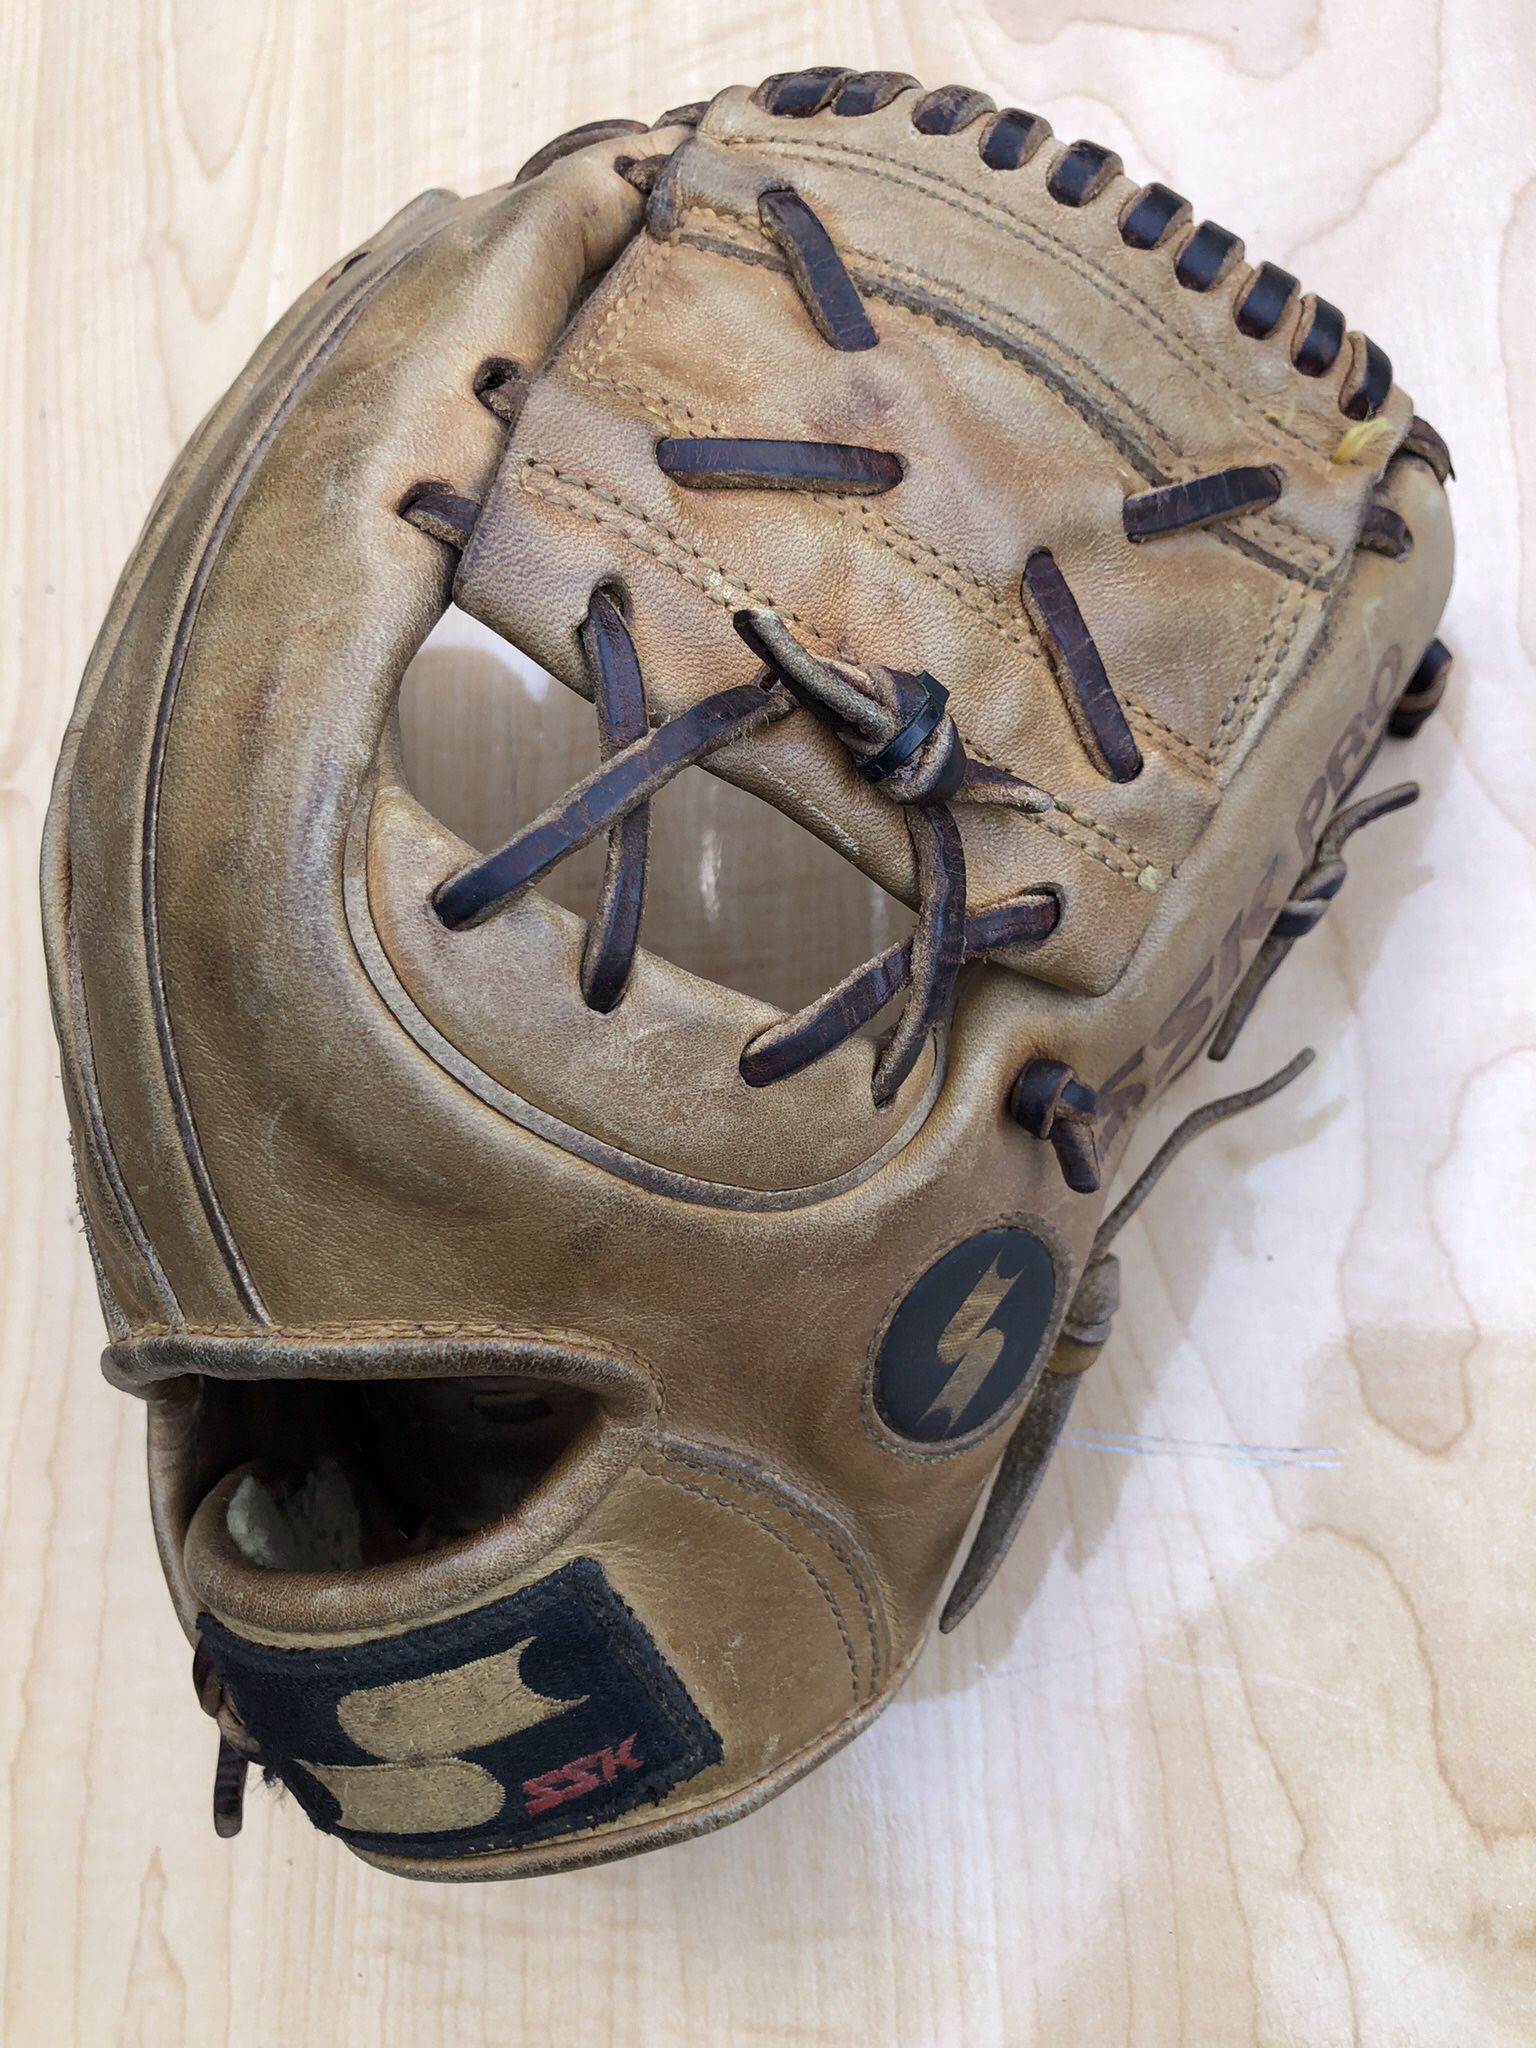 SSK Pro Series Baseball Glove Sz 11” Quality Glove In Solid Condition Have More Baseball And Softball Equipment $70 firm